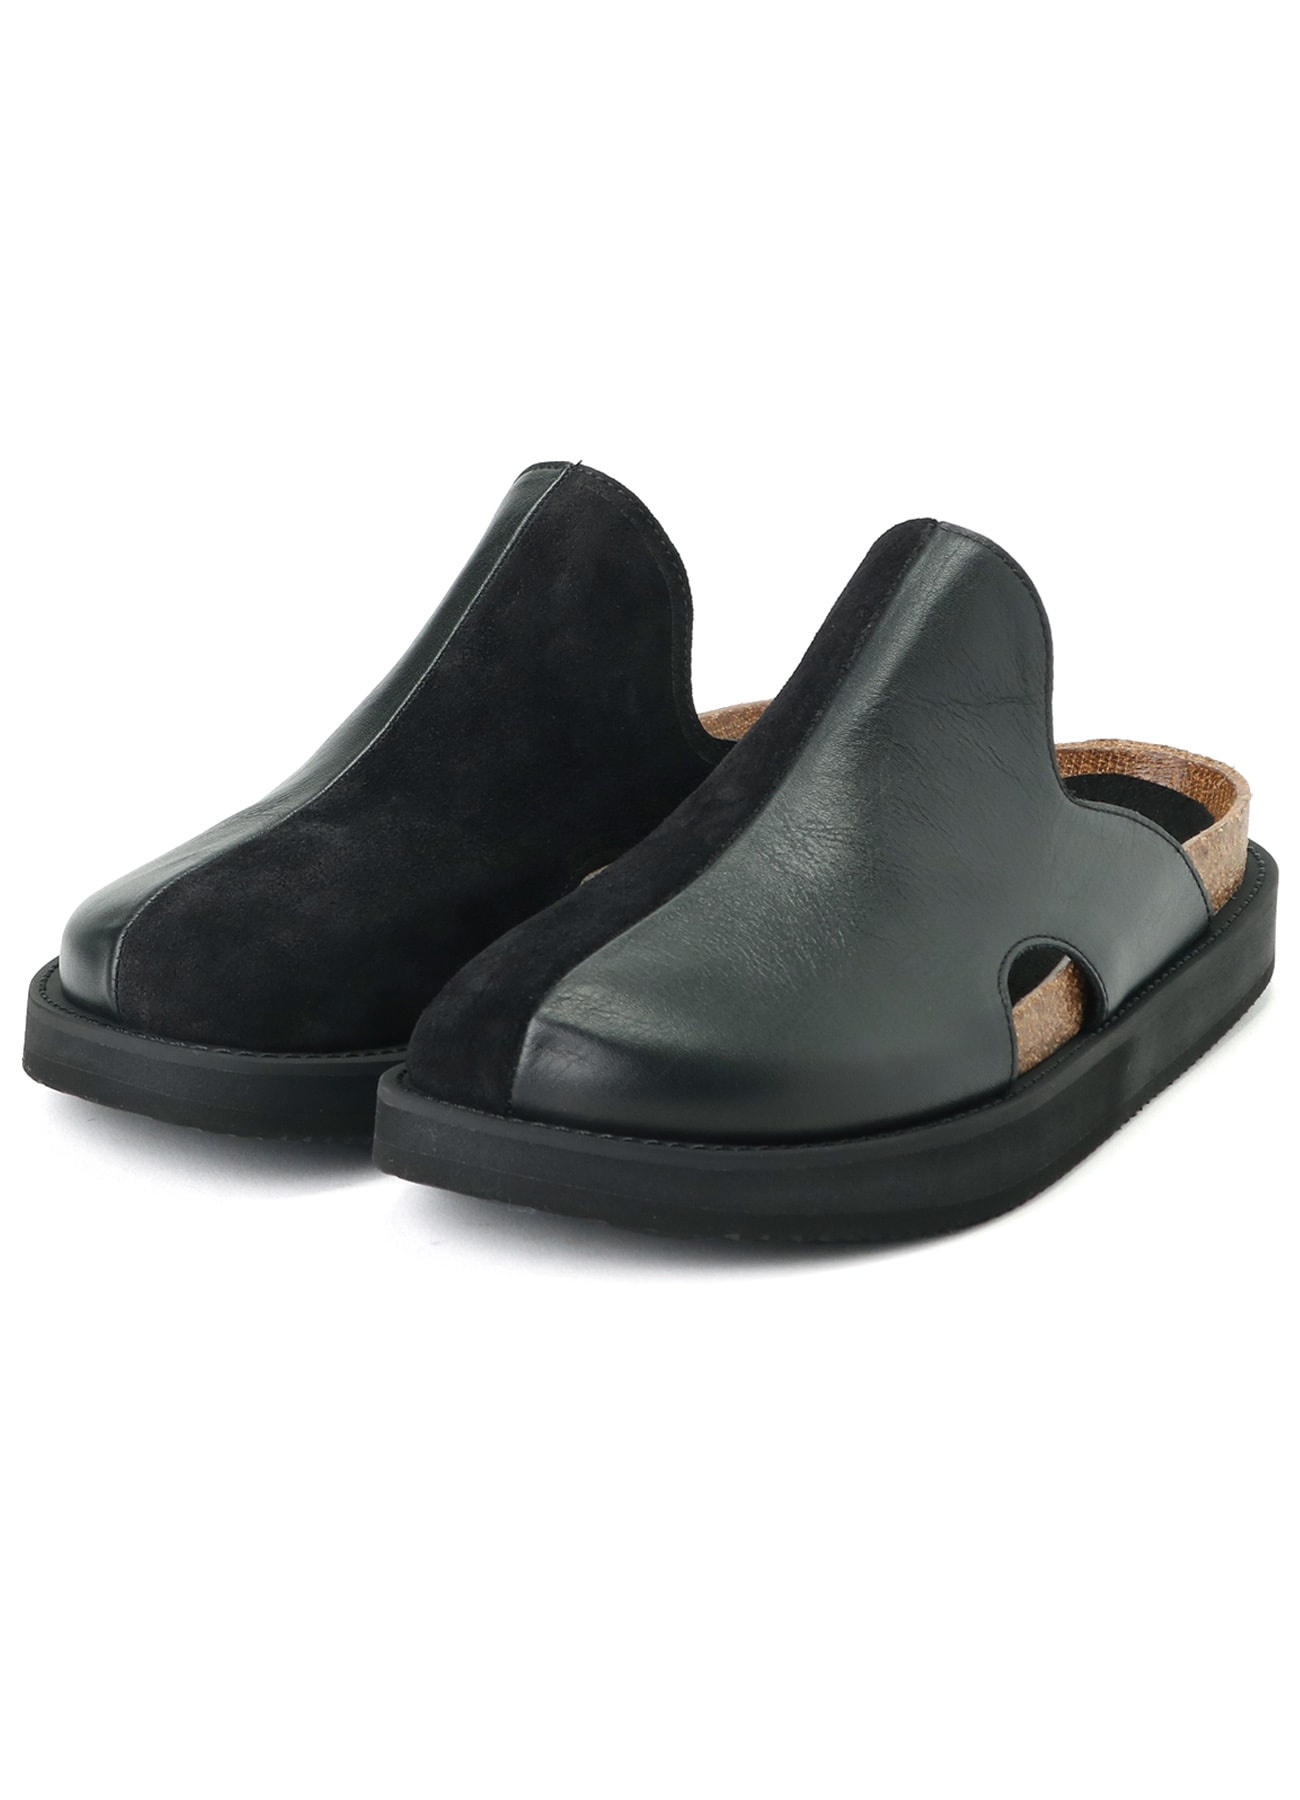 COW LEATHER SANDALS